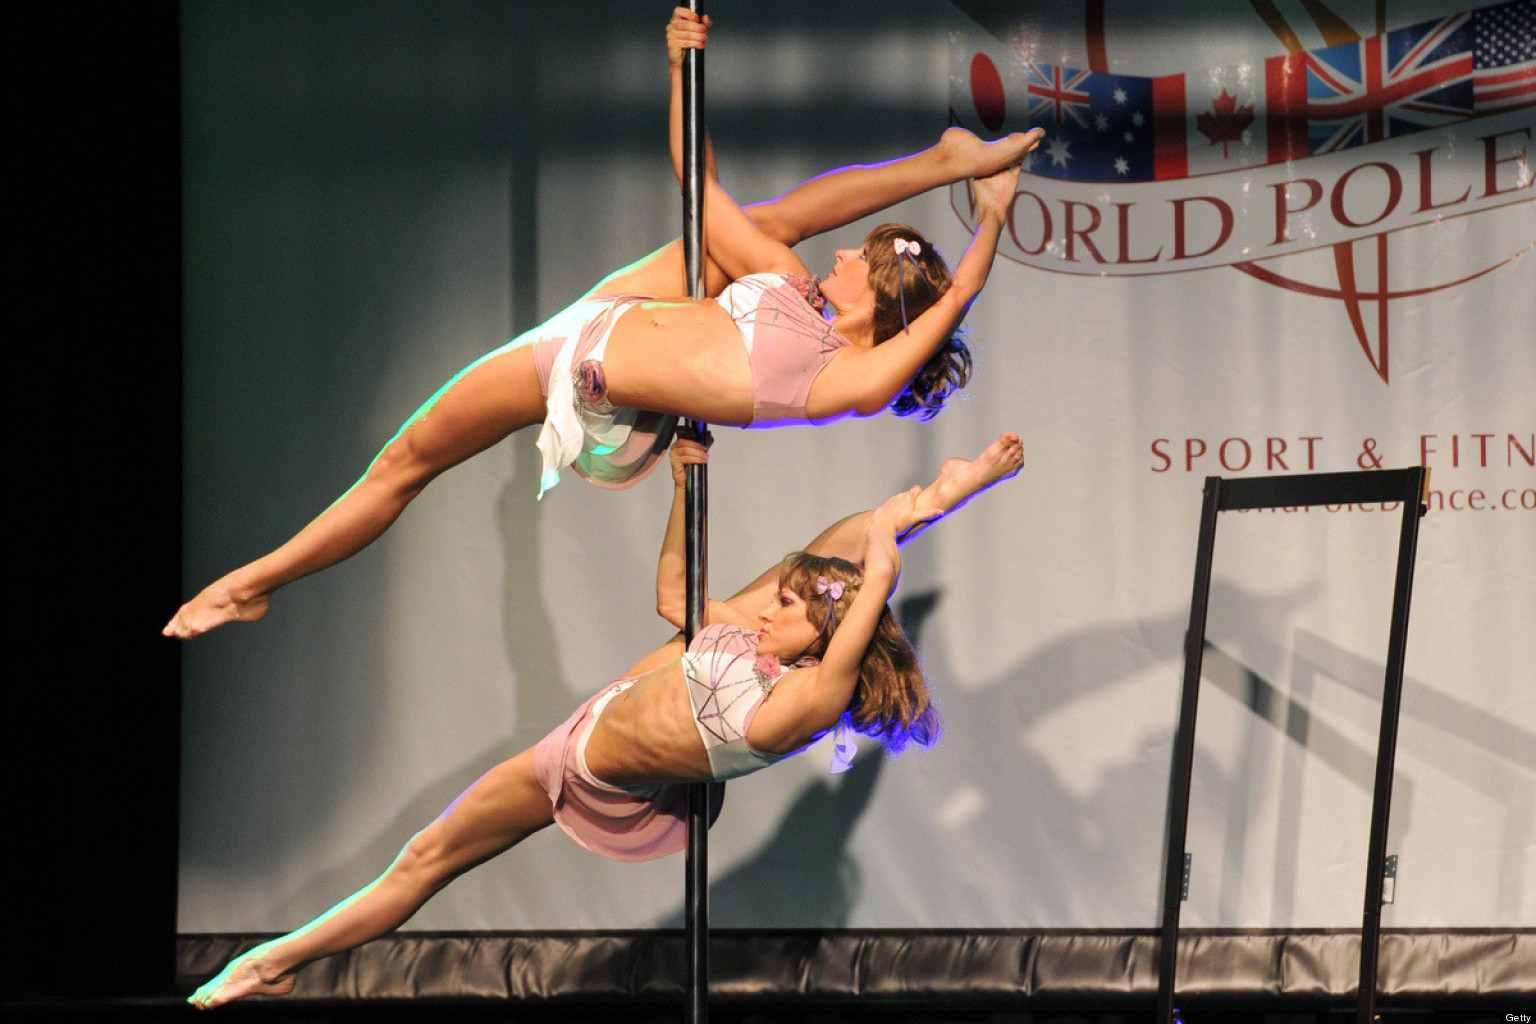 World Pole Dancing Championship Dominated By Russians, Ukrainians